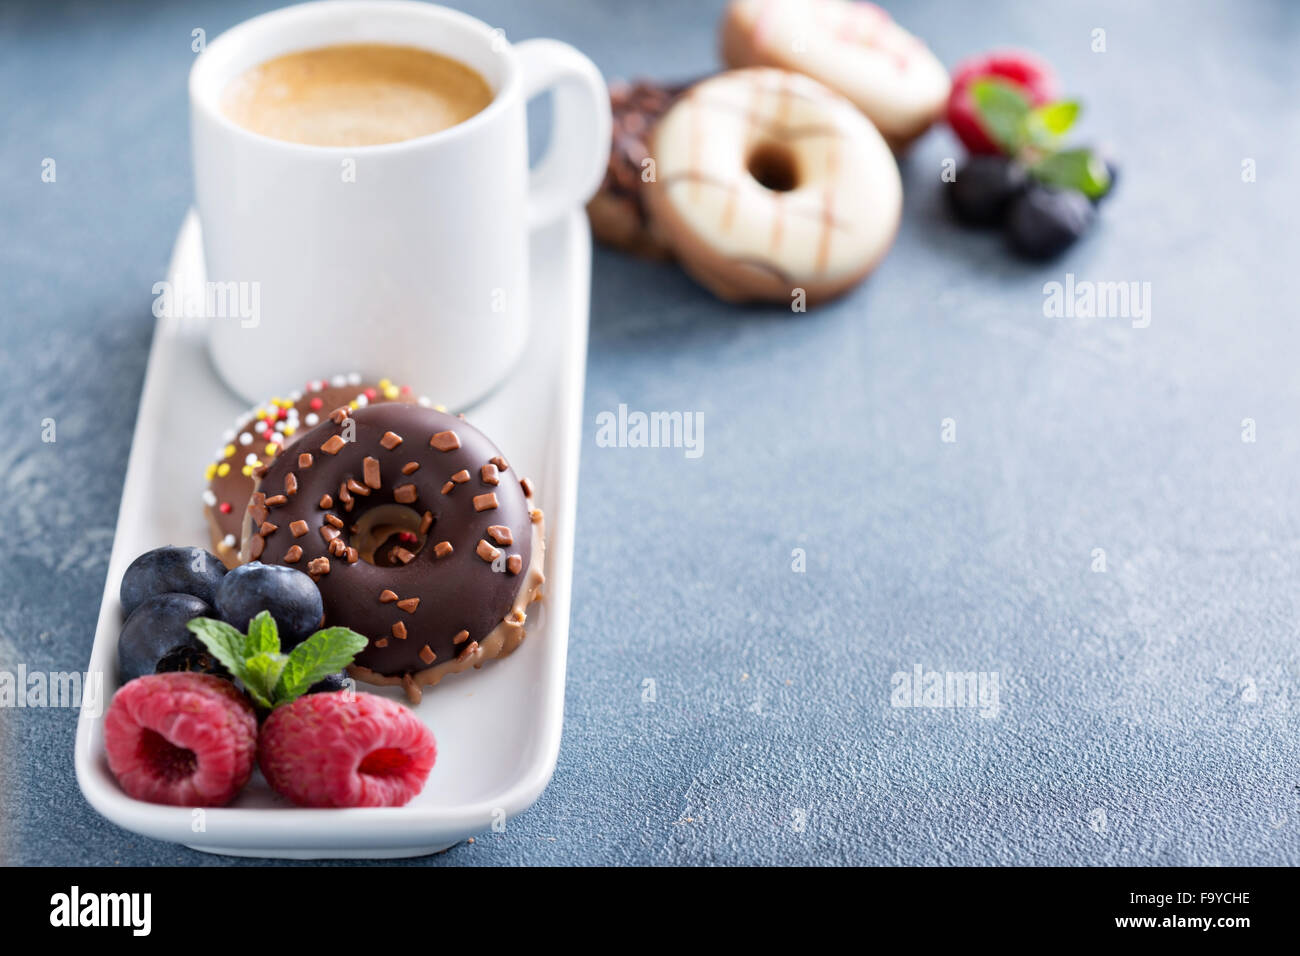 Small glazed mini donuts and coffee in an espresso cup Stock Photo